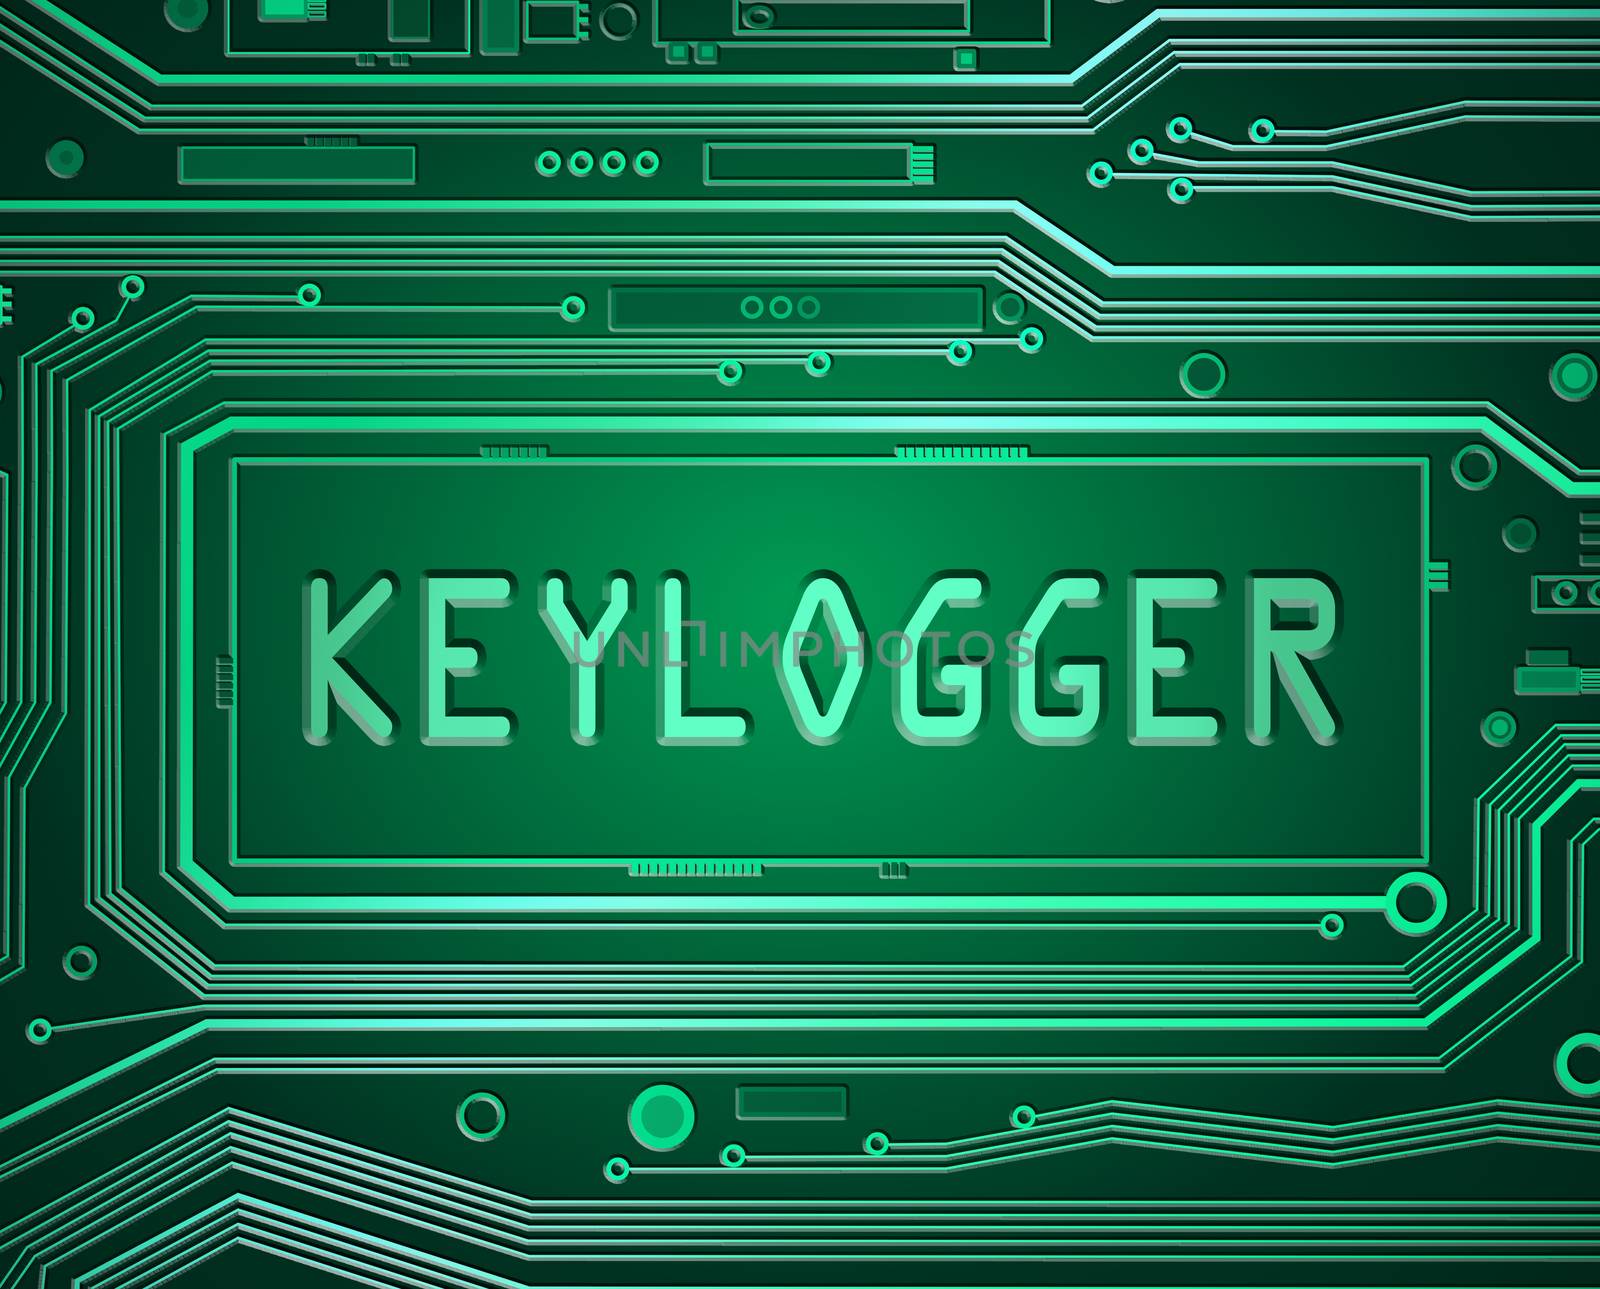 Abstract style illustration depicting printed circuit board components with a keylogger concept.